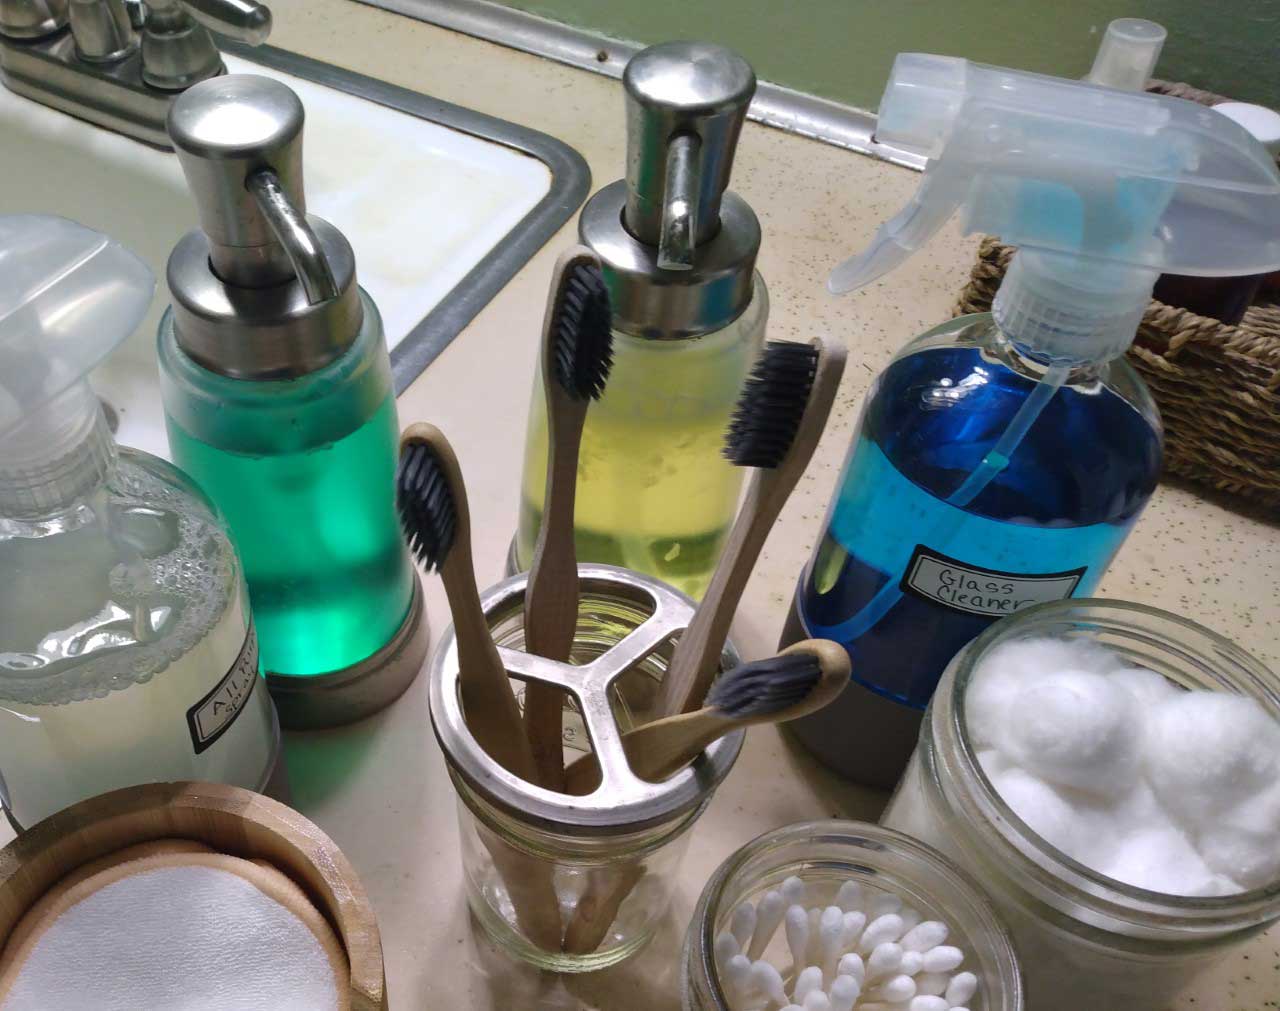 overhead view of toothbrushes in a holder alongside several unlabeled reusable bottles of cleaner